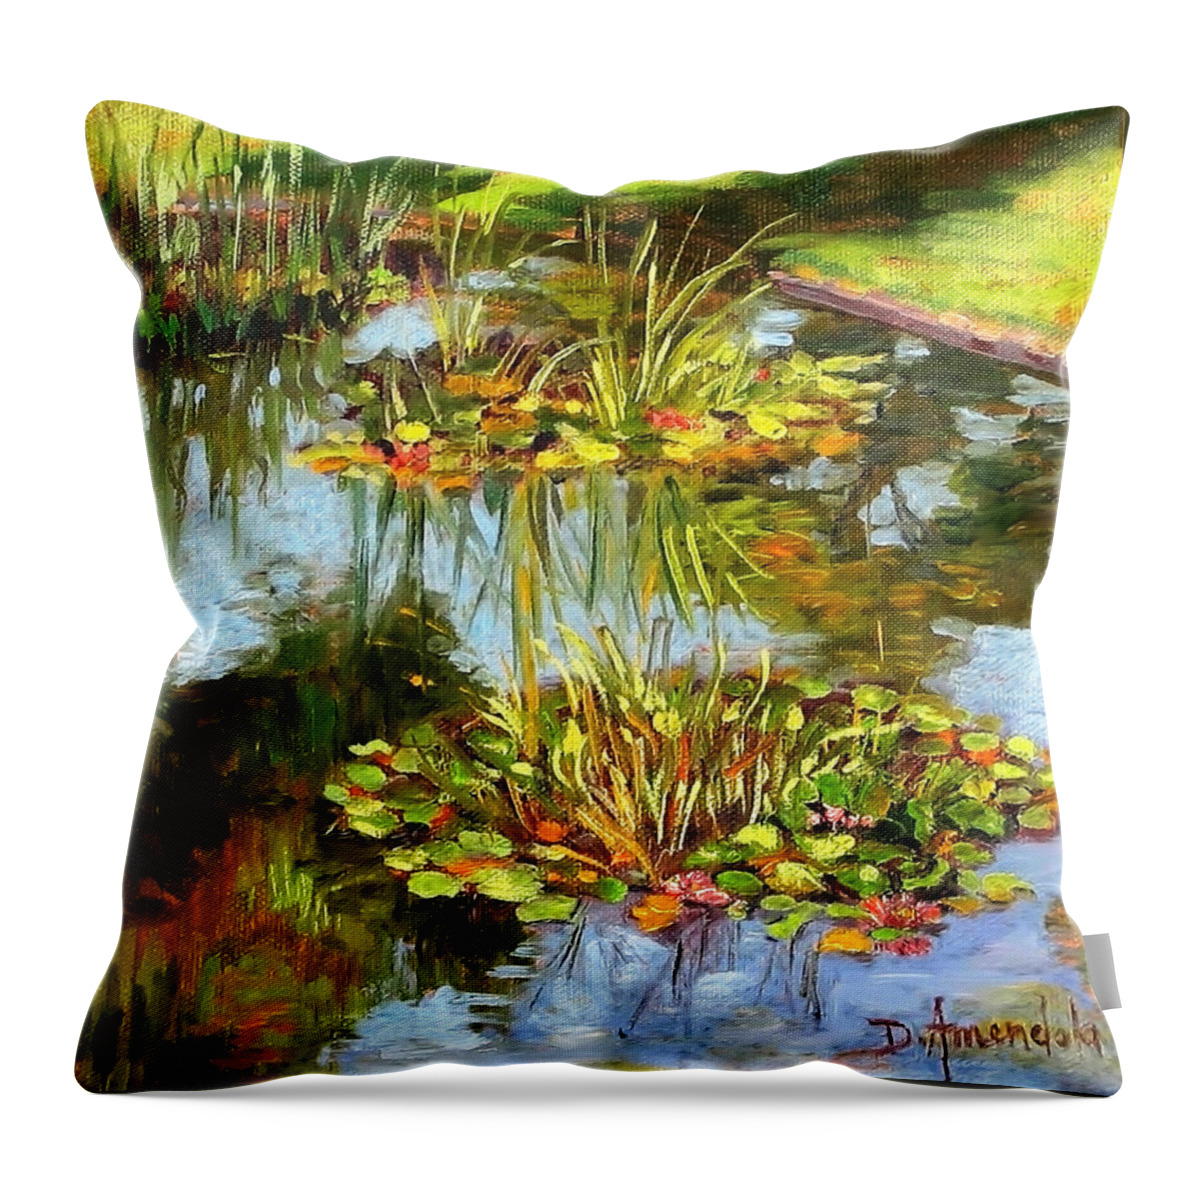 Water Lilies Throw Pillow featuring the painting Water Lilies In California by Dominique Amendola